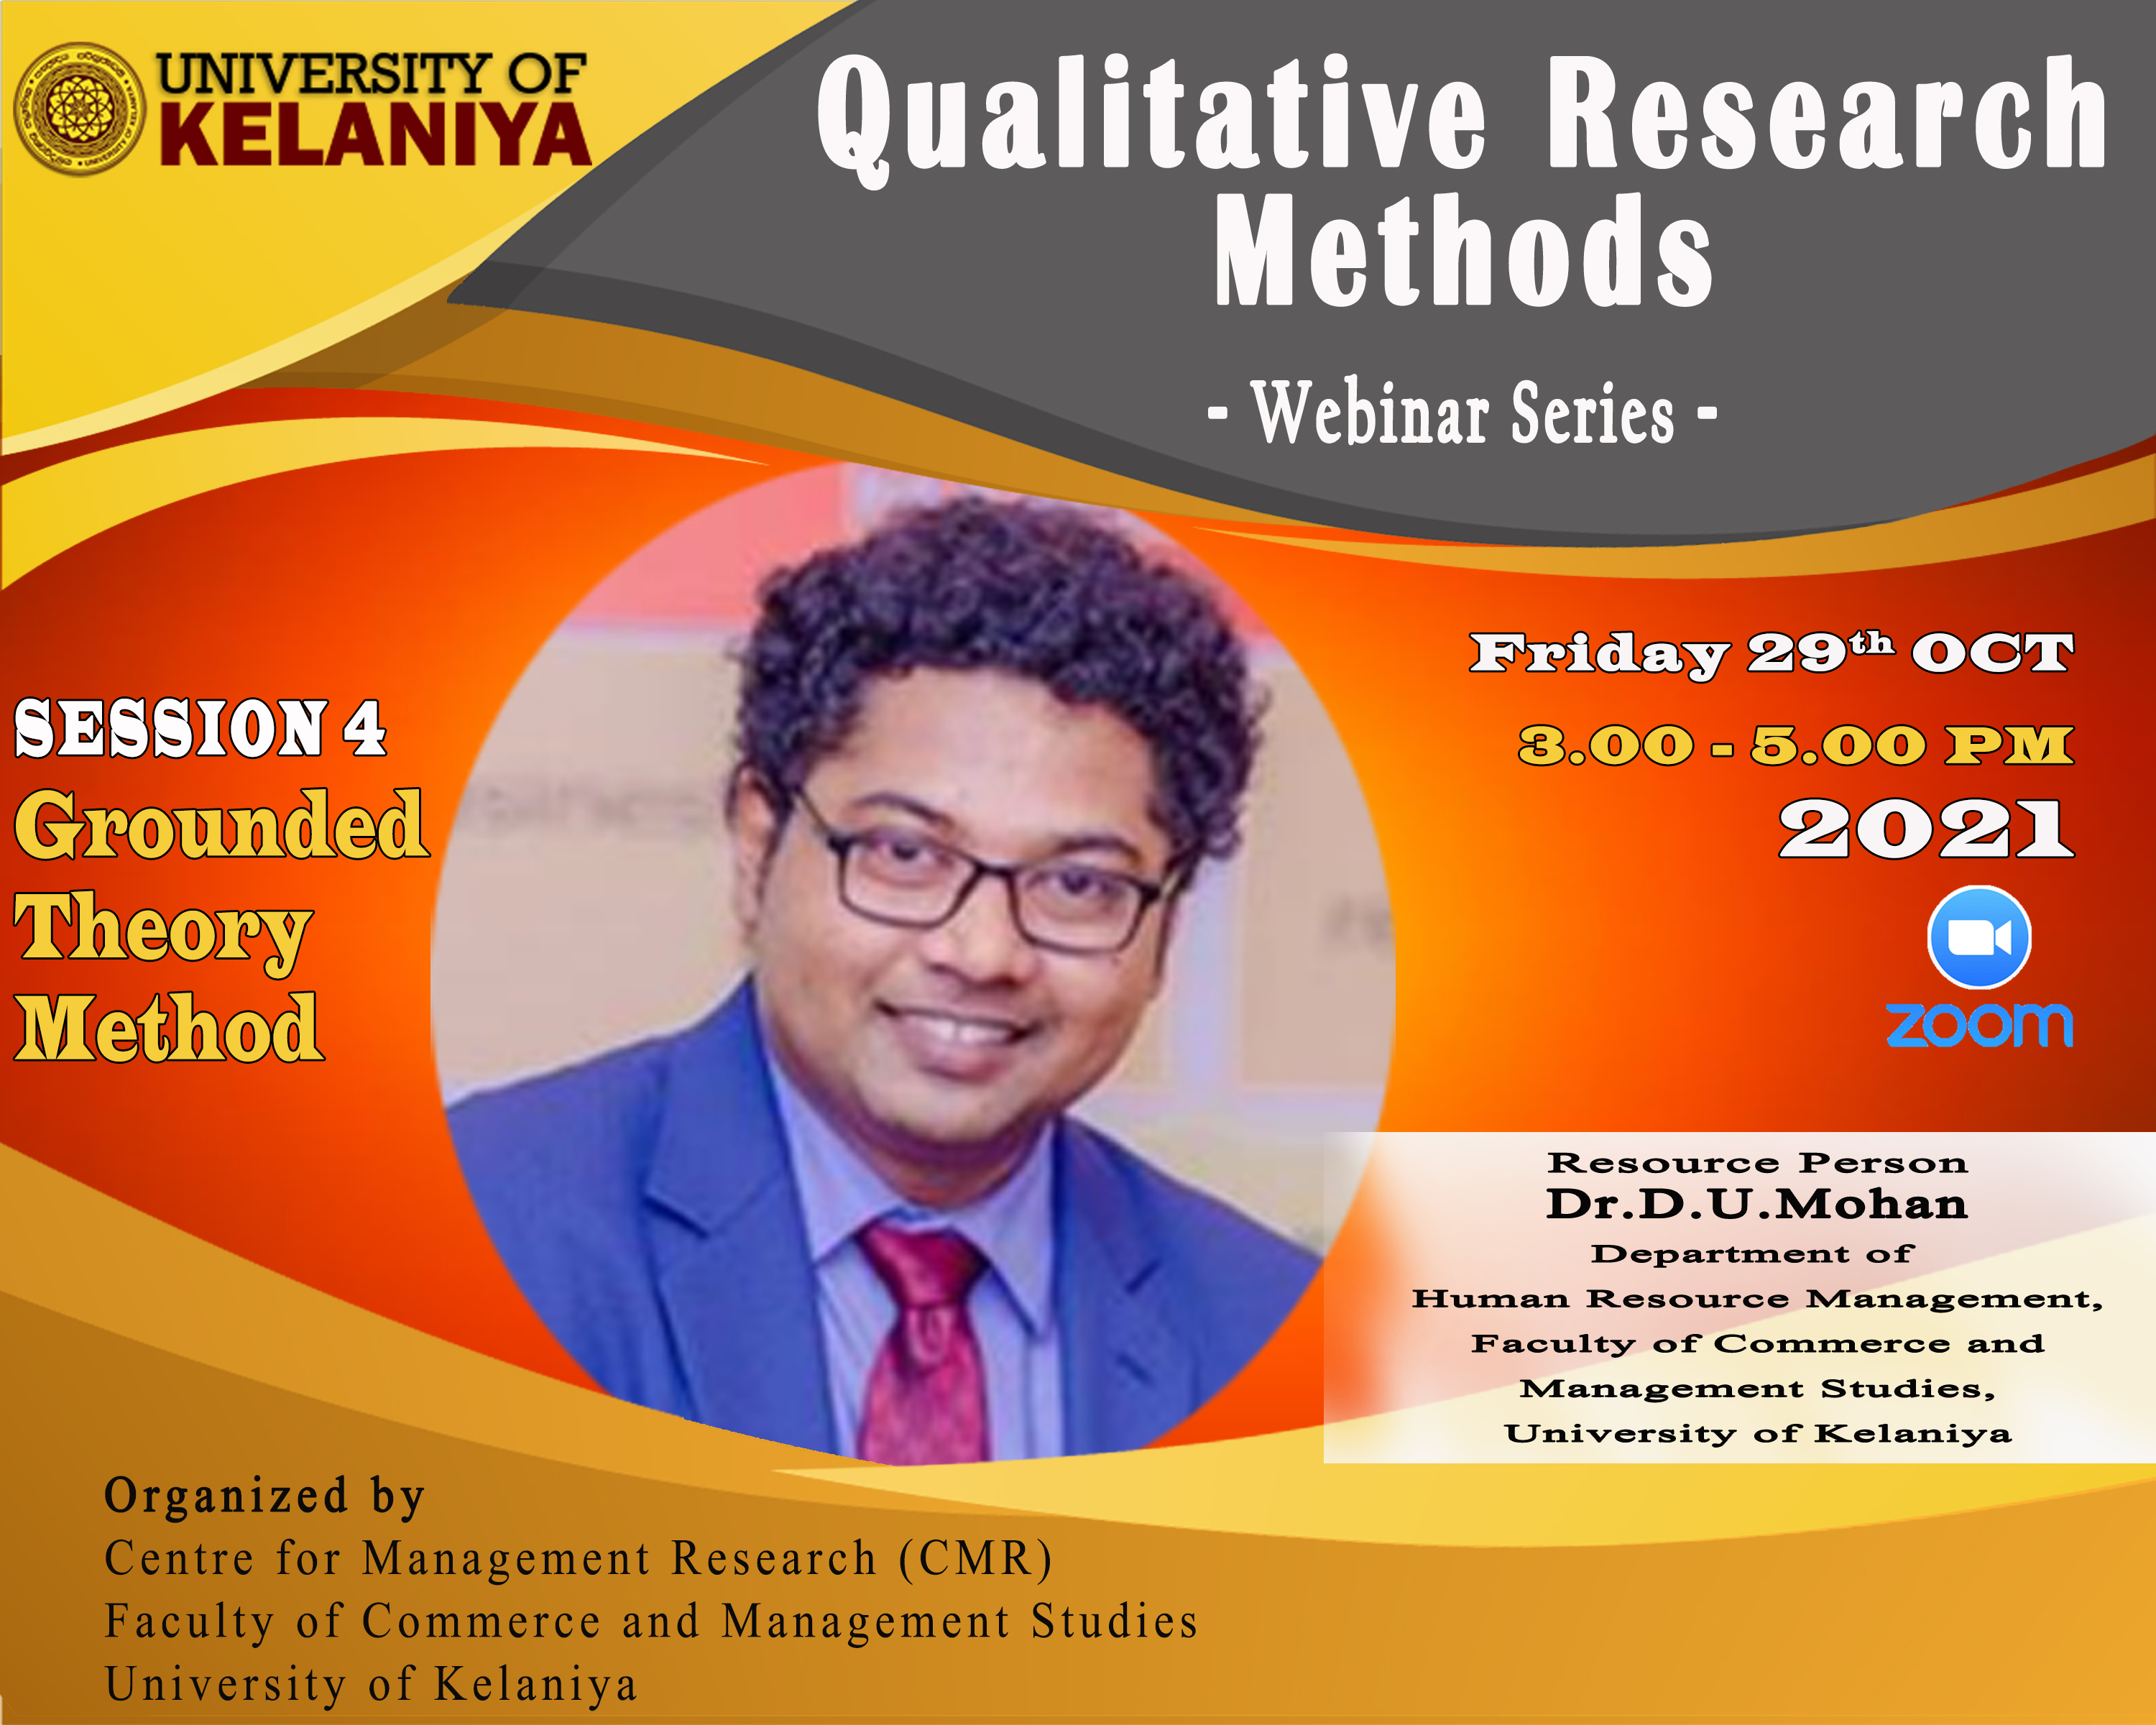 Qualitative Research Methods - Session 4